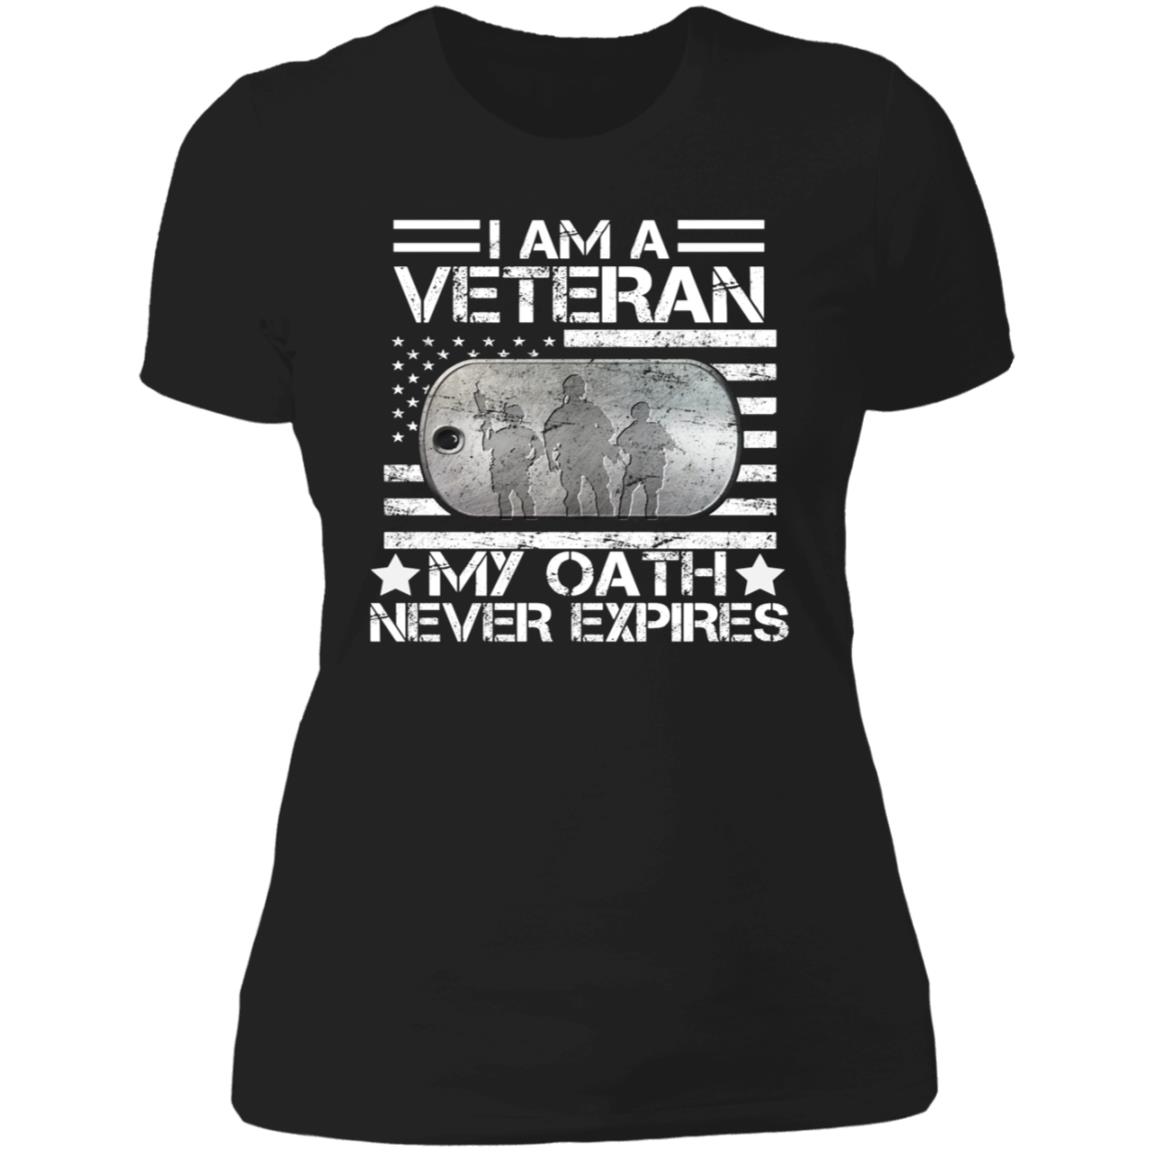 Download IAm A Veteran My Oath Never Expires Shirts - AmazeTees ...